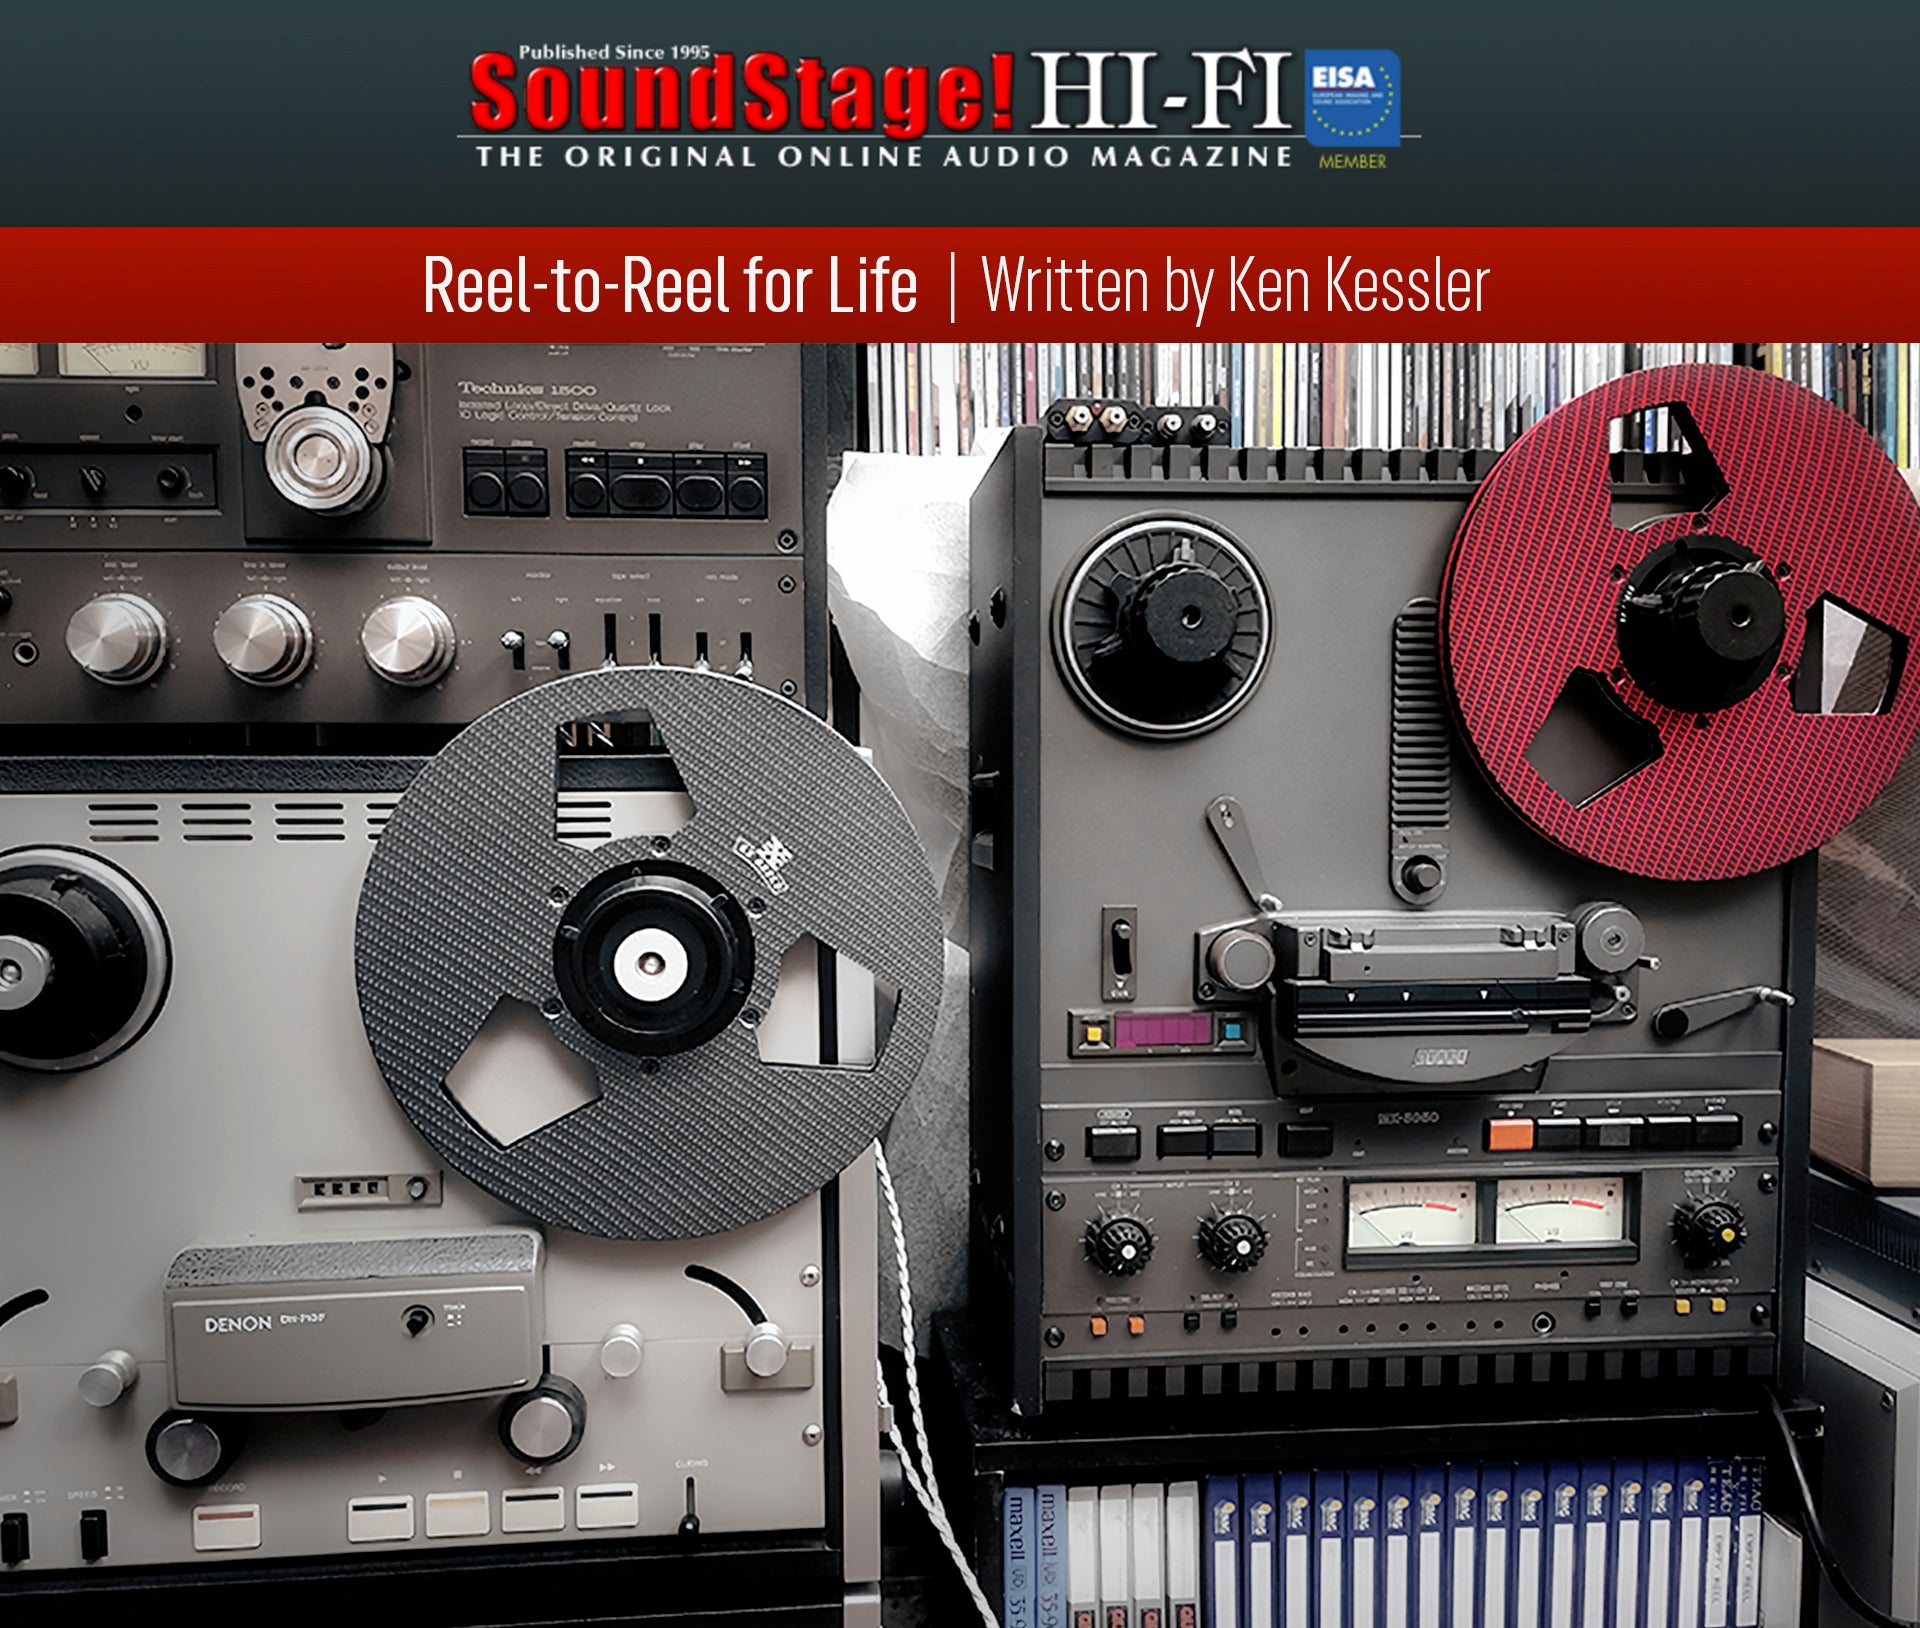 The SoundStage! HIFI Review of RX Reels Blows Our Minds!